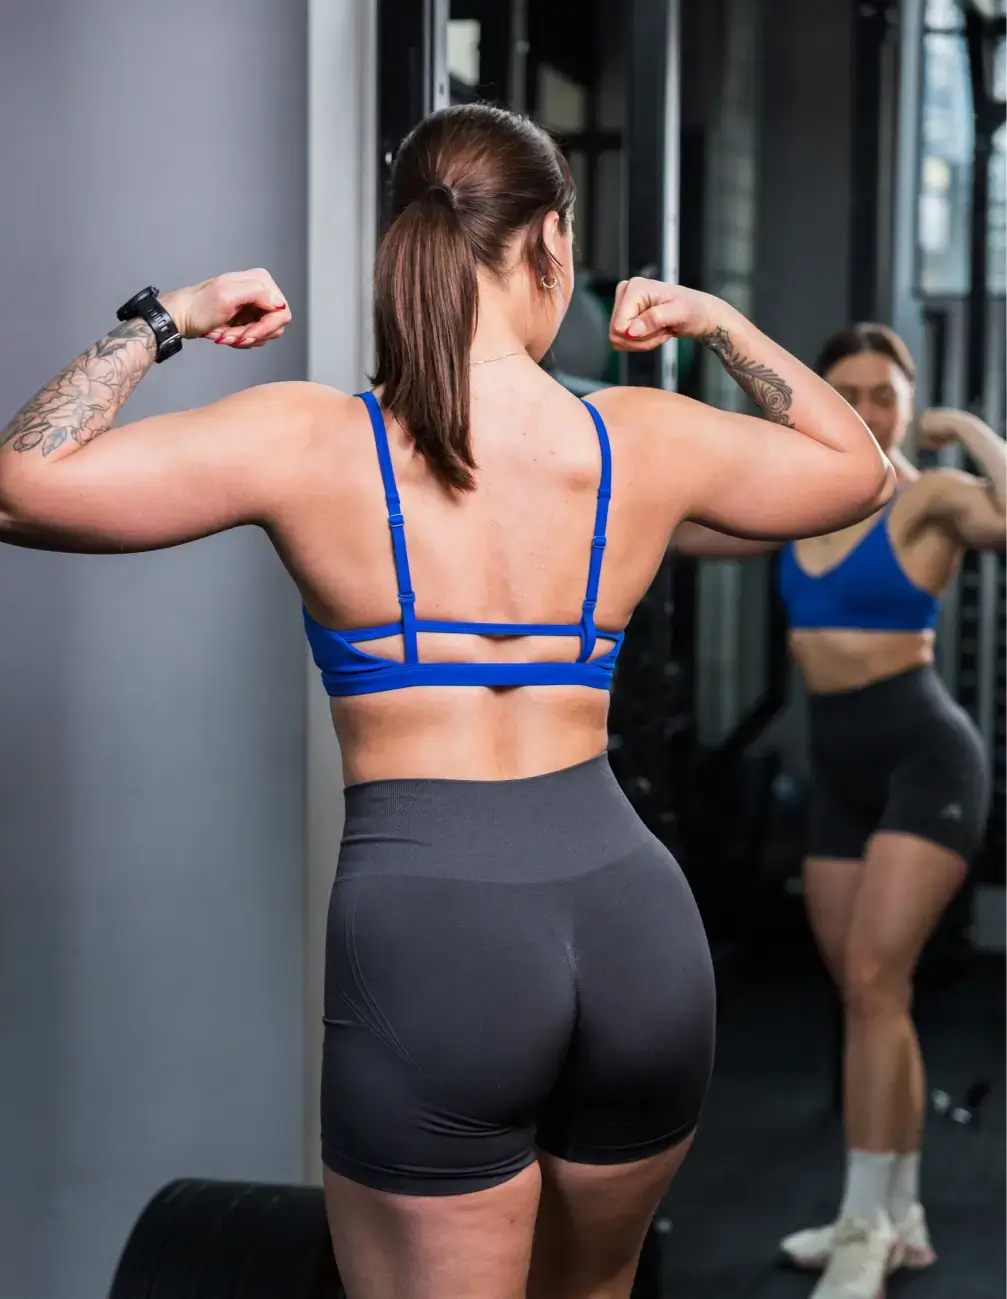 5 back exercises to tone featured